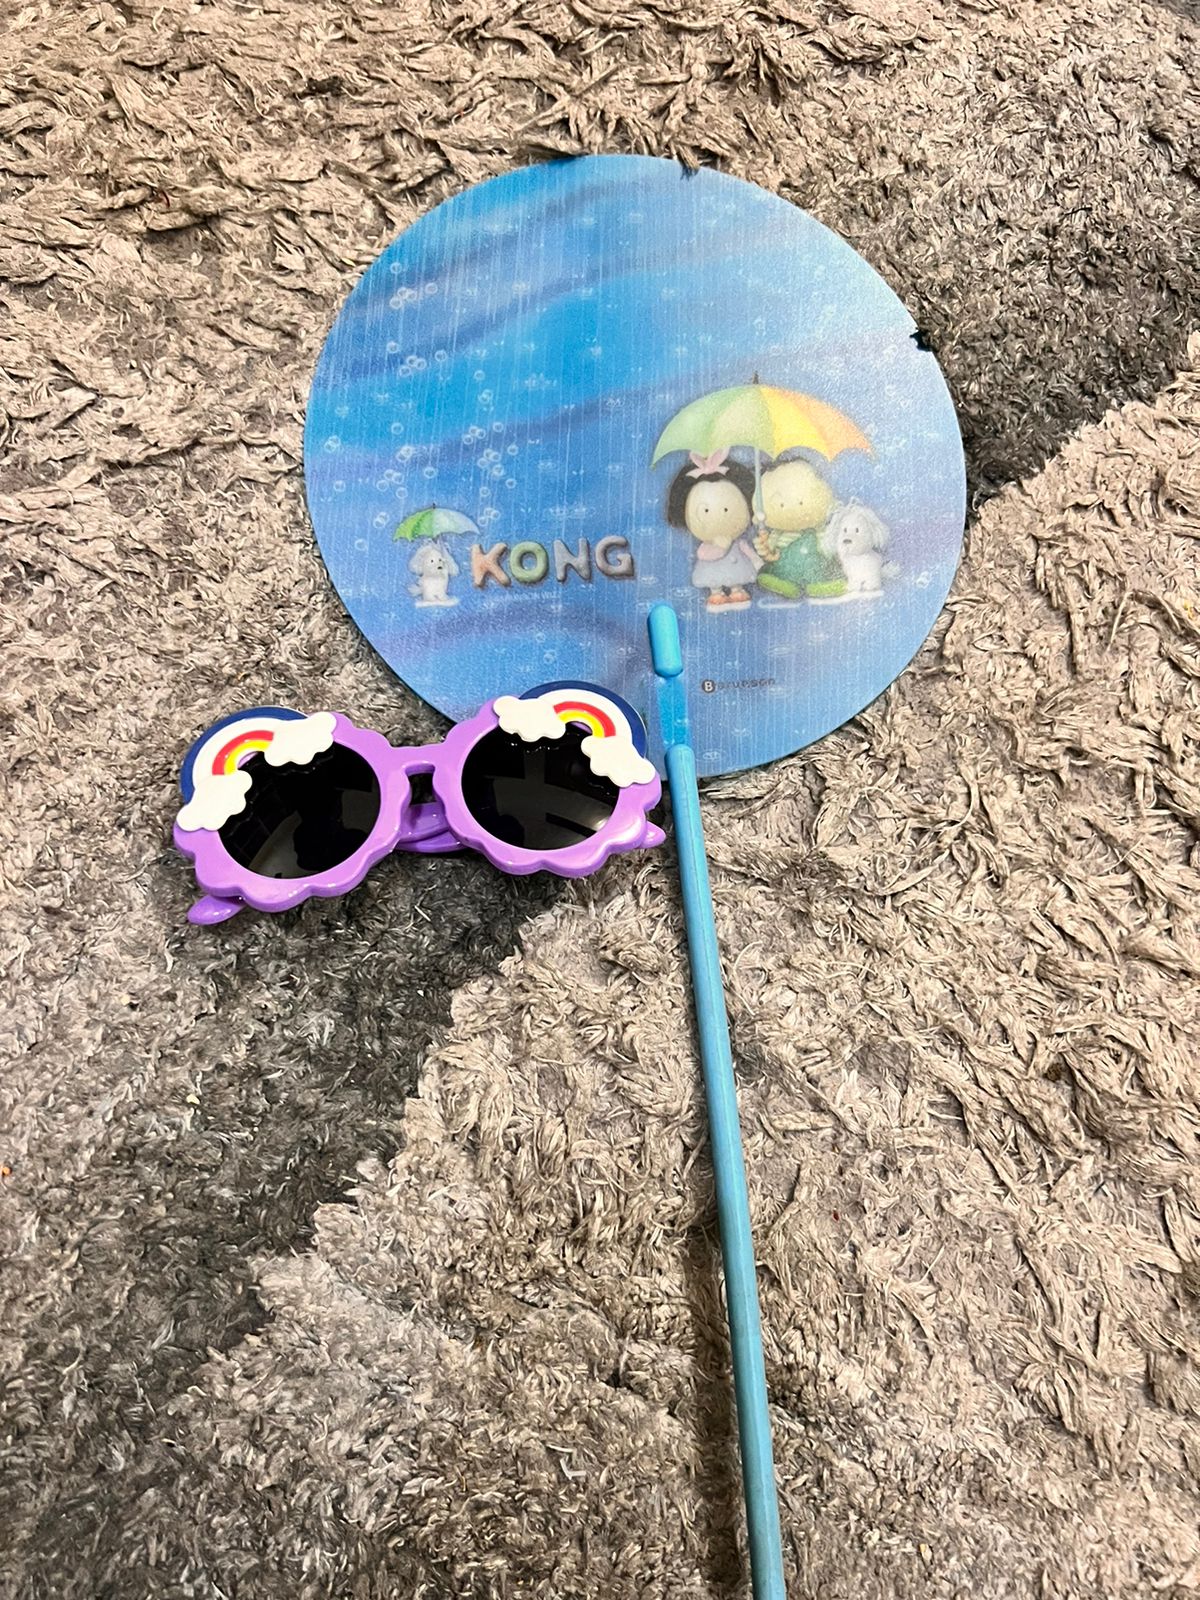 Pack of 2: Imported Pack of 2 Swining Fan with Raibow Glases Blessed Sale